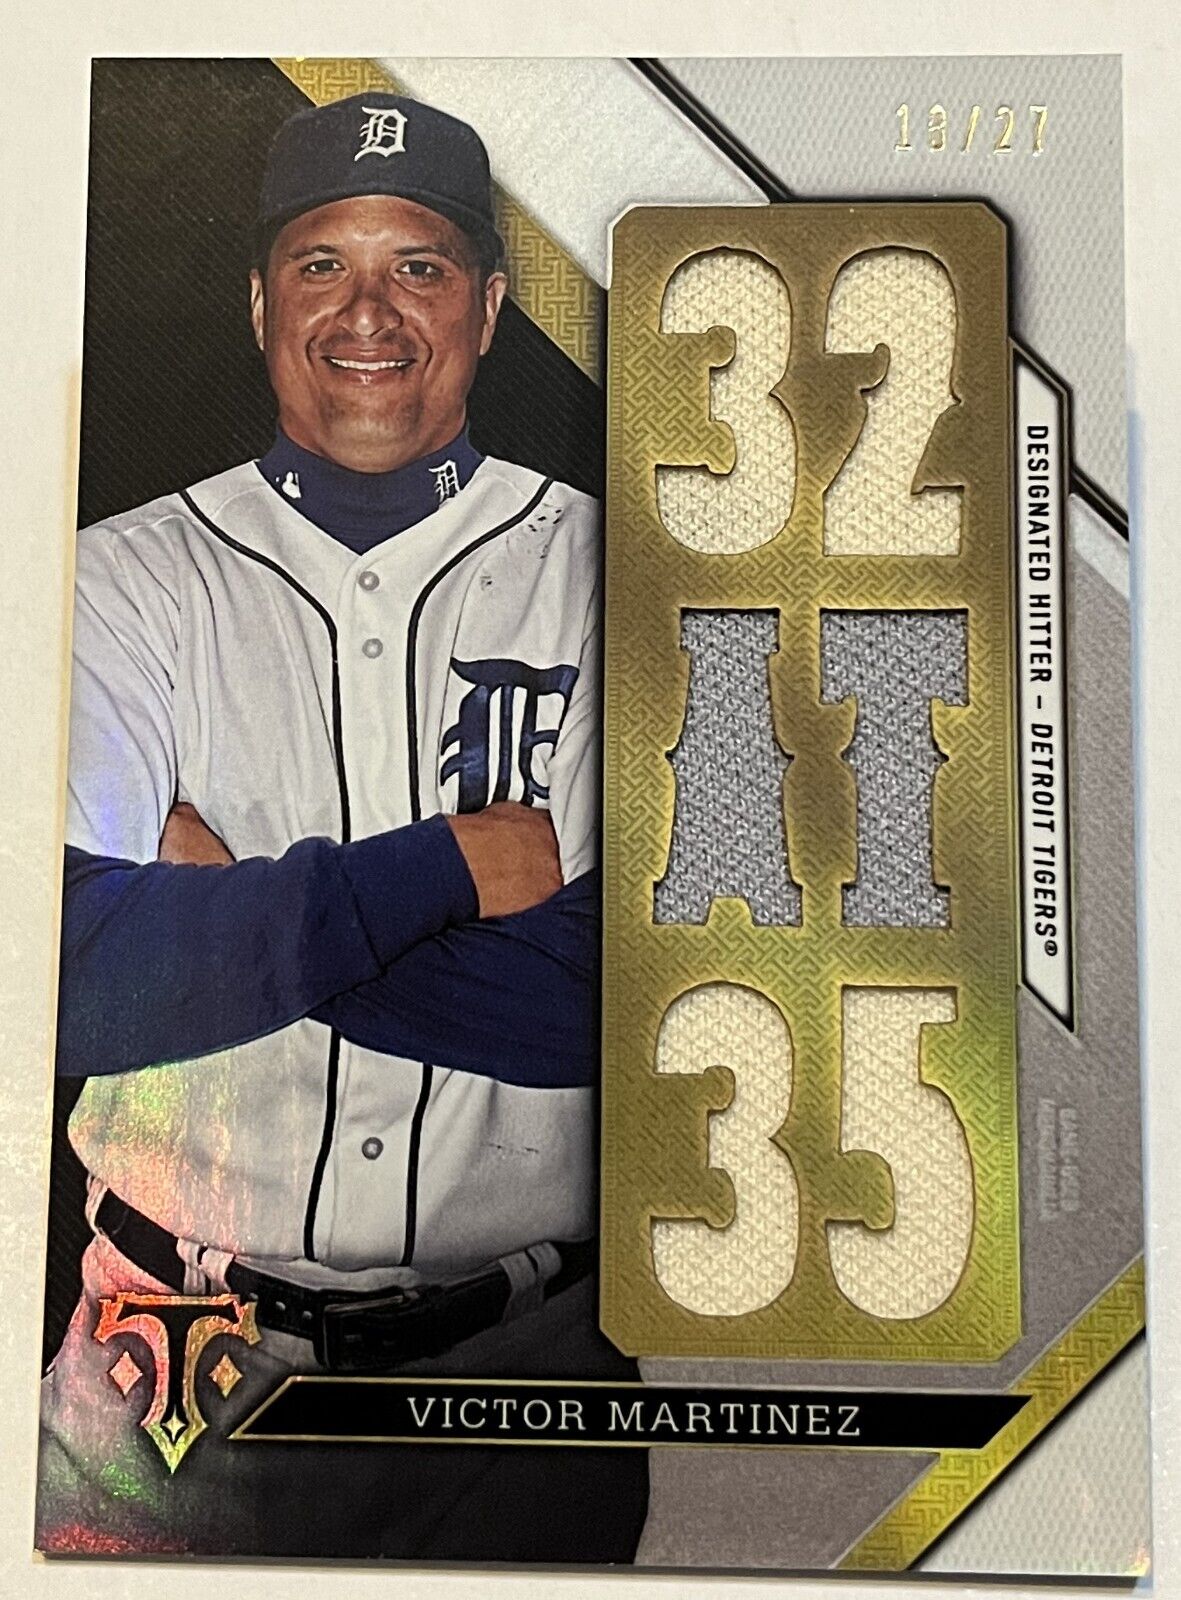 2016 Topps Triple Threads Victor Martinez 6 Game Used Jersey Detroit Tigers #/27